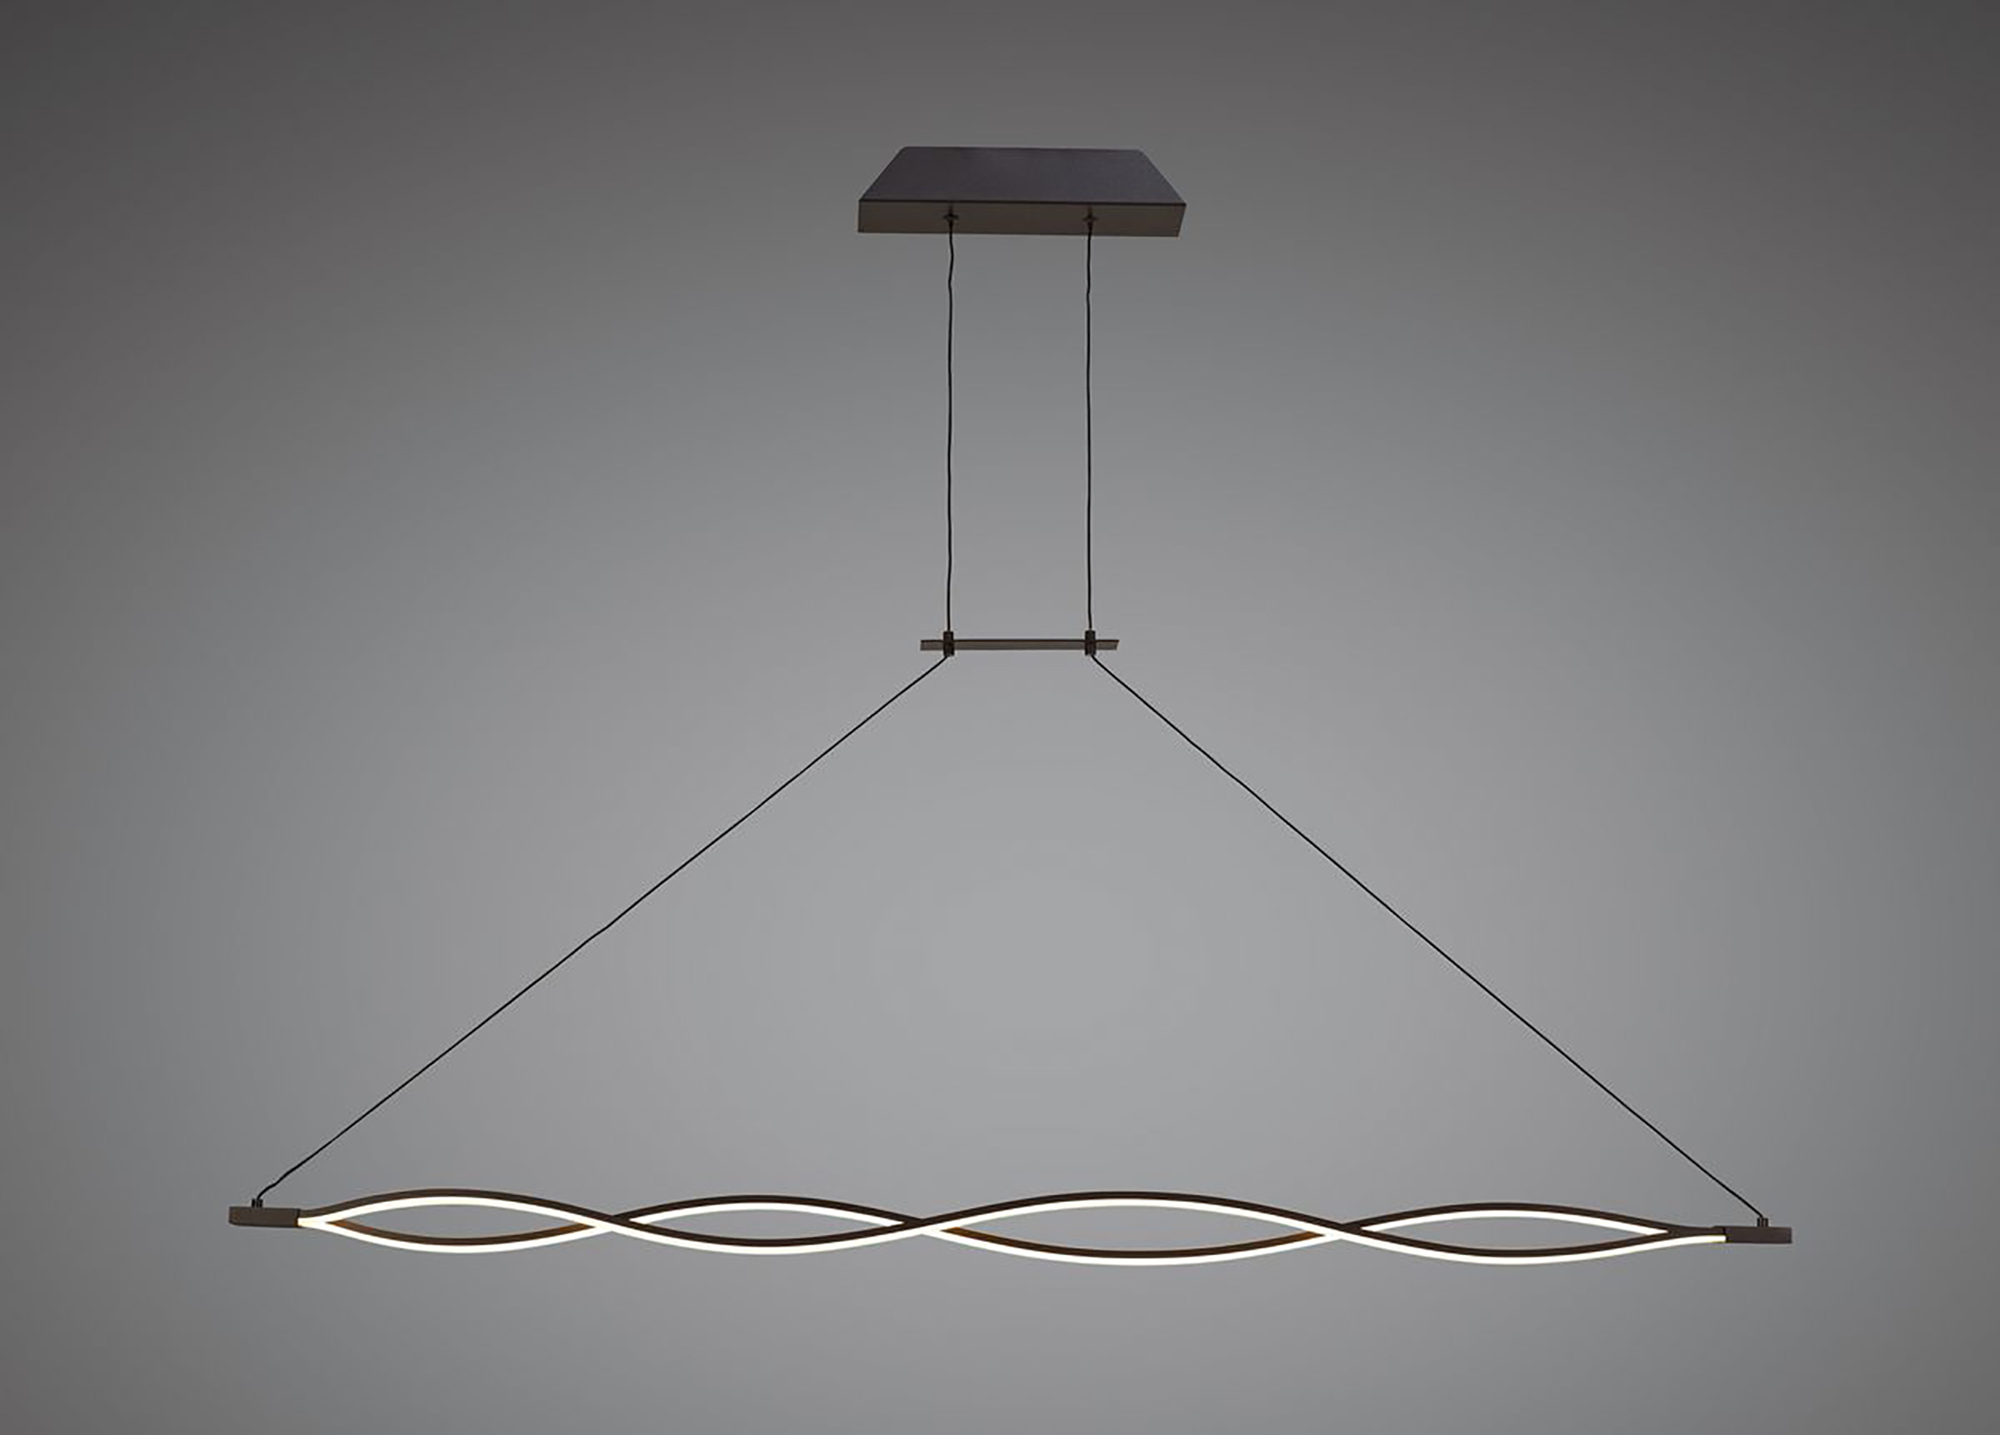 Sahara Brown Oxide XL Ceiling Lights Mantra Linear Fittings